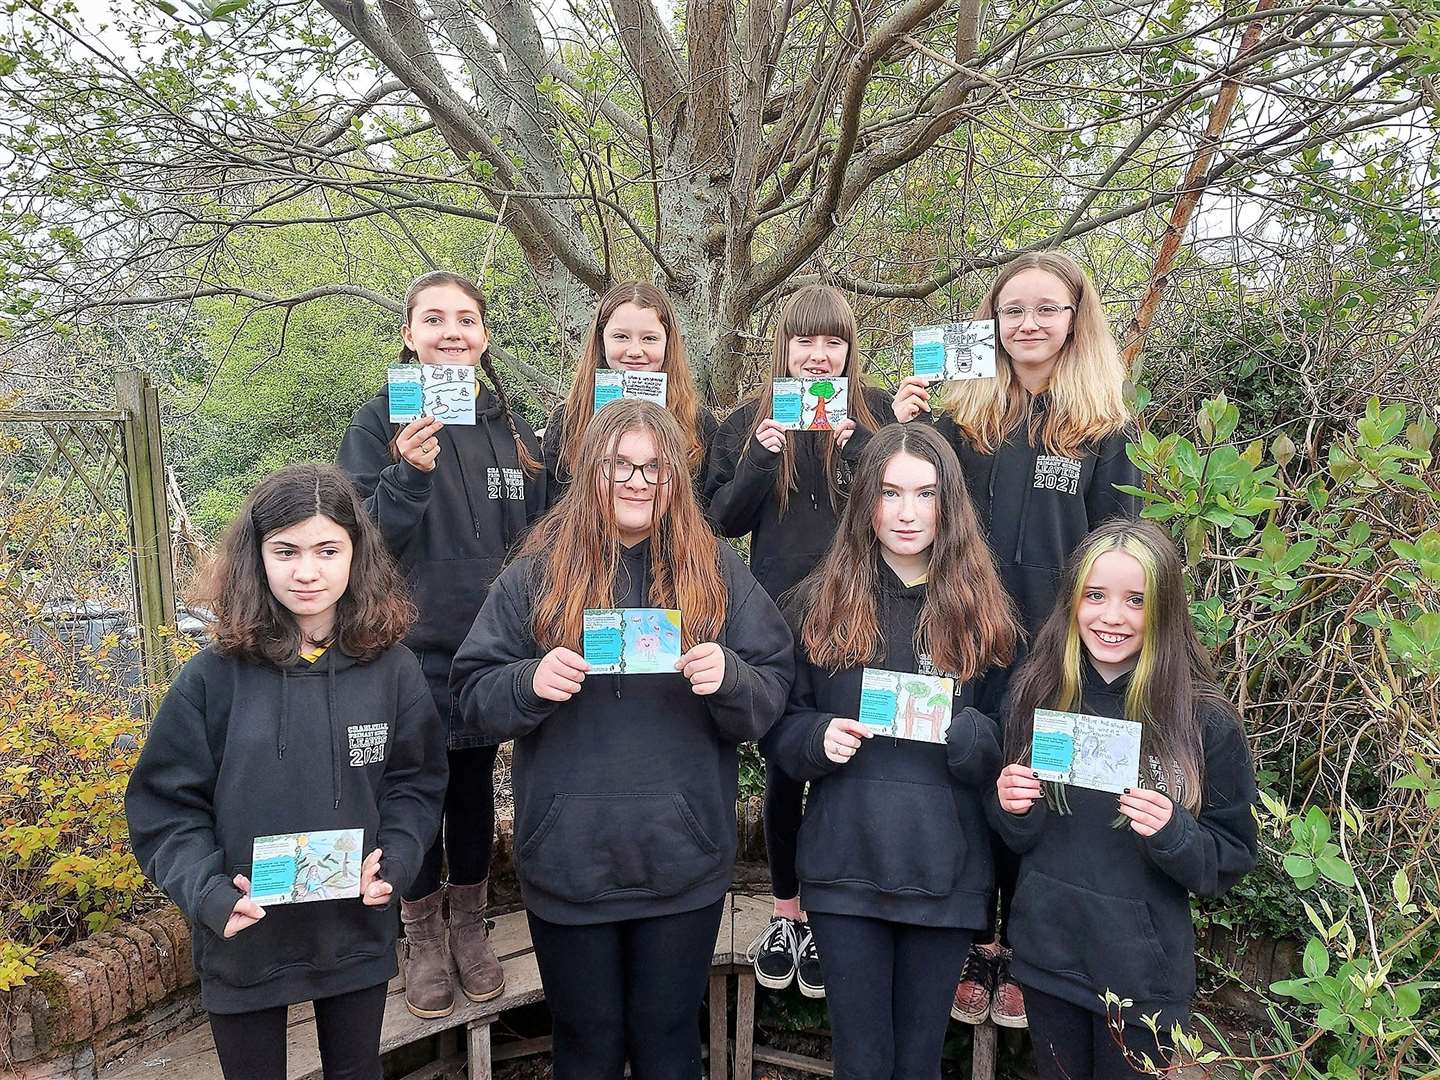 Pupils at Cradlehall Primary School show off their completed postcards.Back (l-r): Susanna, Alicia, Kasey, Amelia. Front (l-r): Katie, Abbey, Naimh, Alexia.